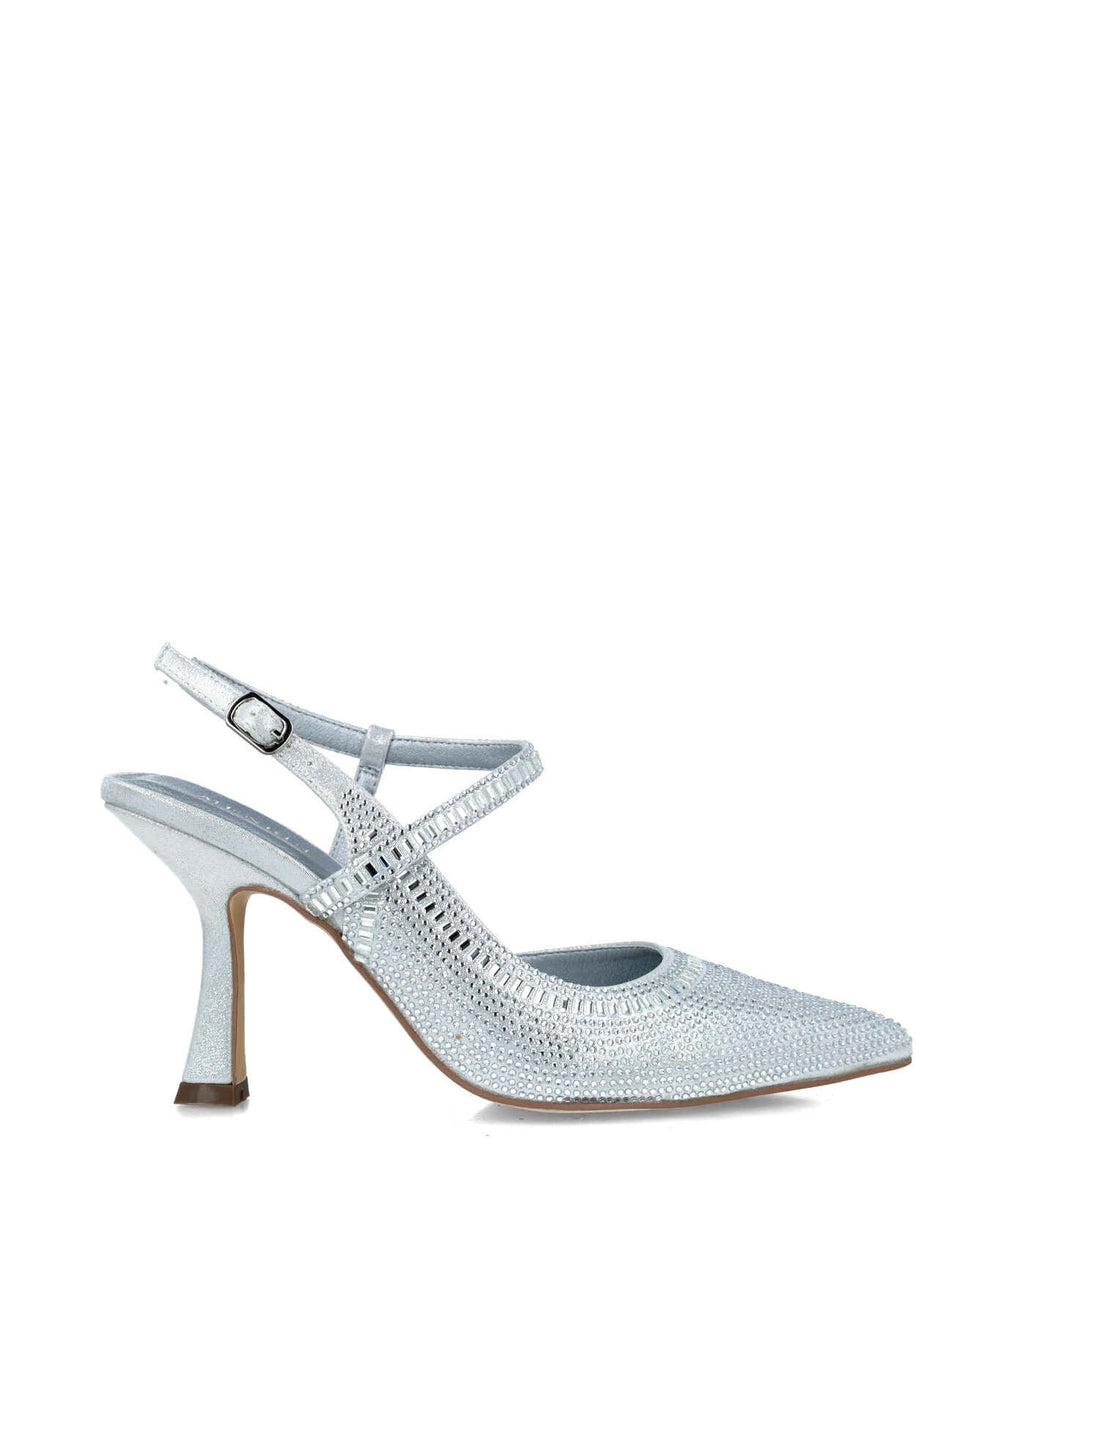 Silver Embellished Pumps With Ankle Strap_24830_09_01